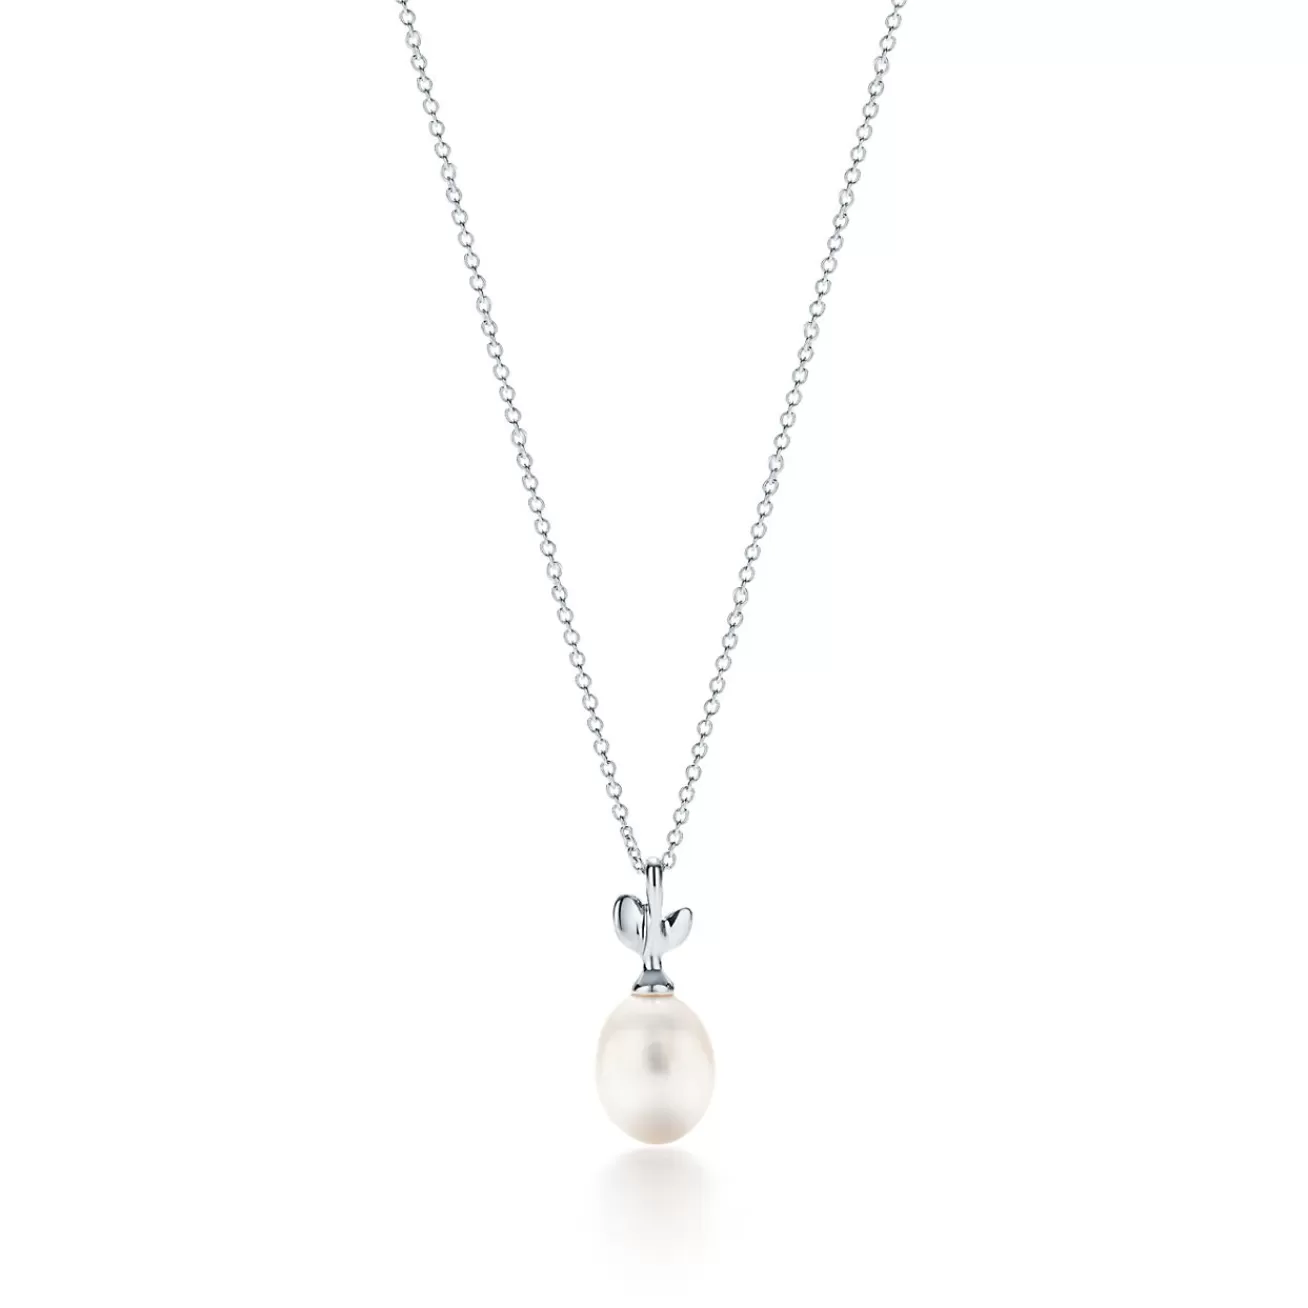 Tiffany & Co. Paloma Picasso® Olive Leaf pendant in sterling silver with a cultured pearl. | ^ Necklaces & Pendants | Gifts for Her